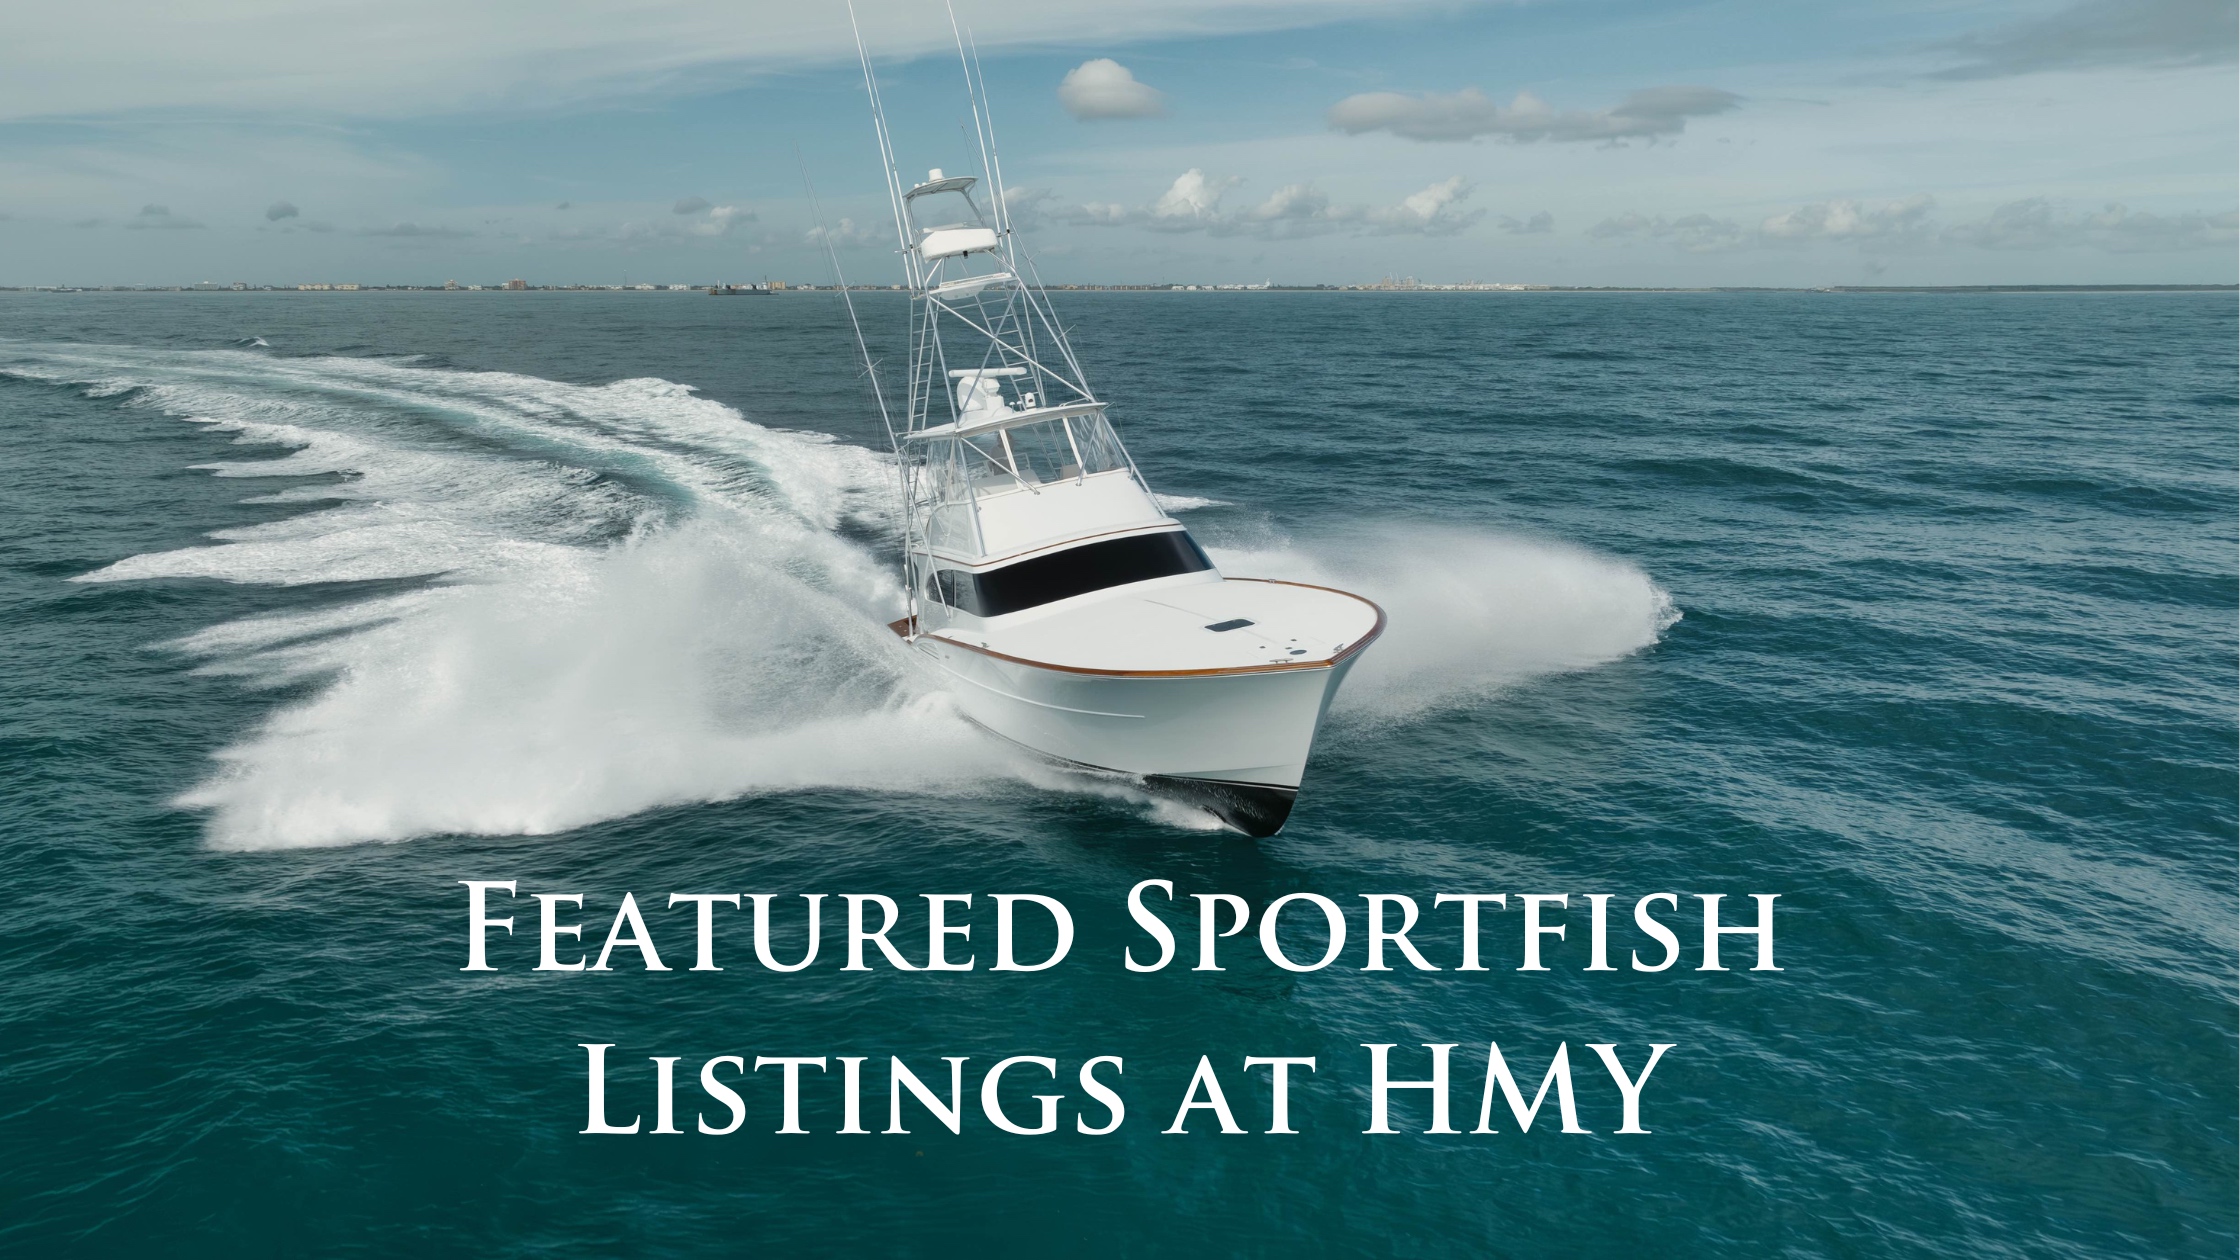 10 Featured Sportfishing Yachts Available Now at HMY